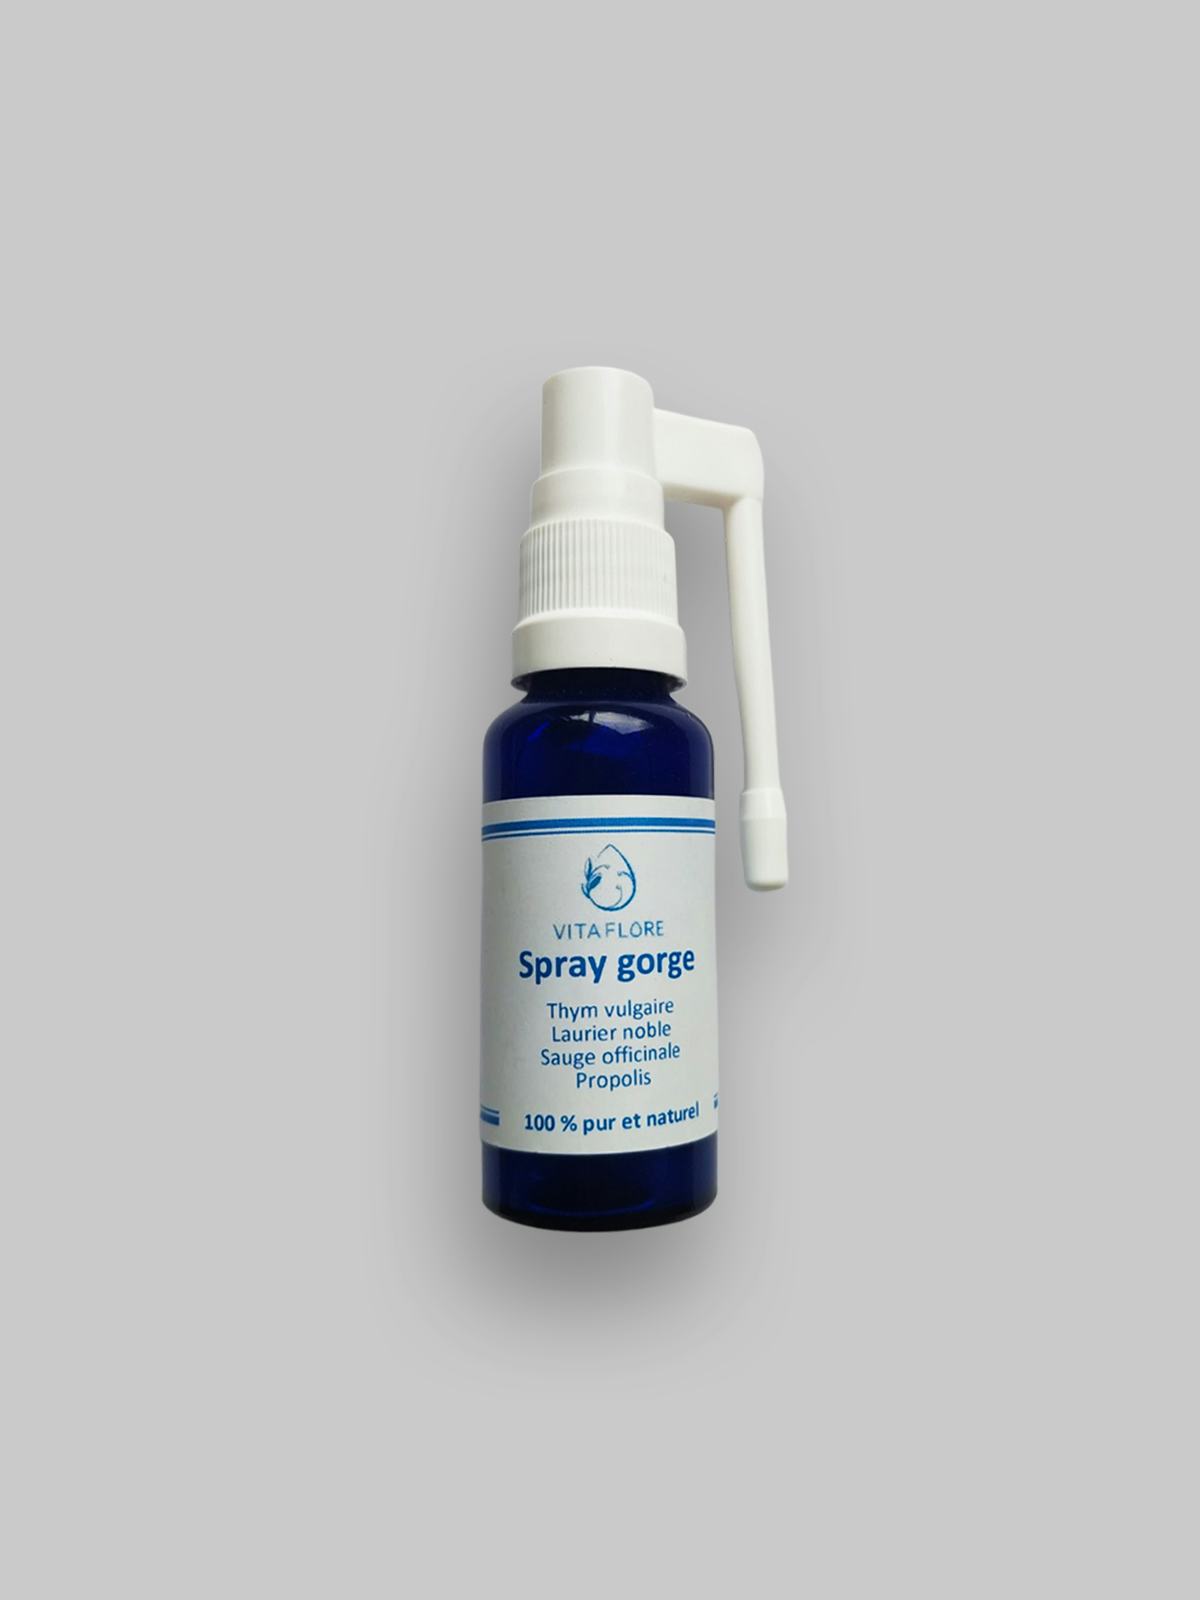 Spray gorge, artisanal product for direct sale in Switzerland